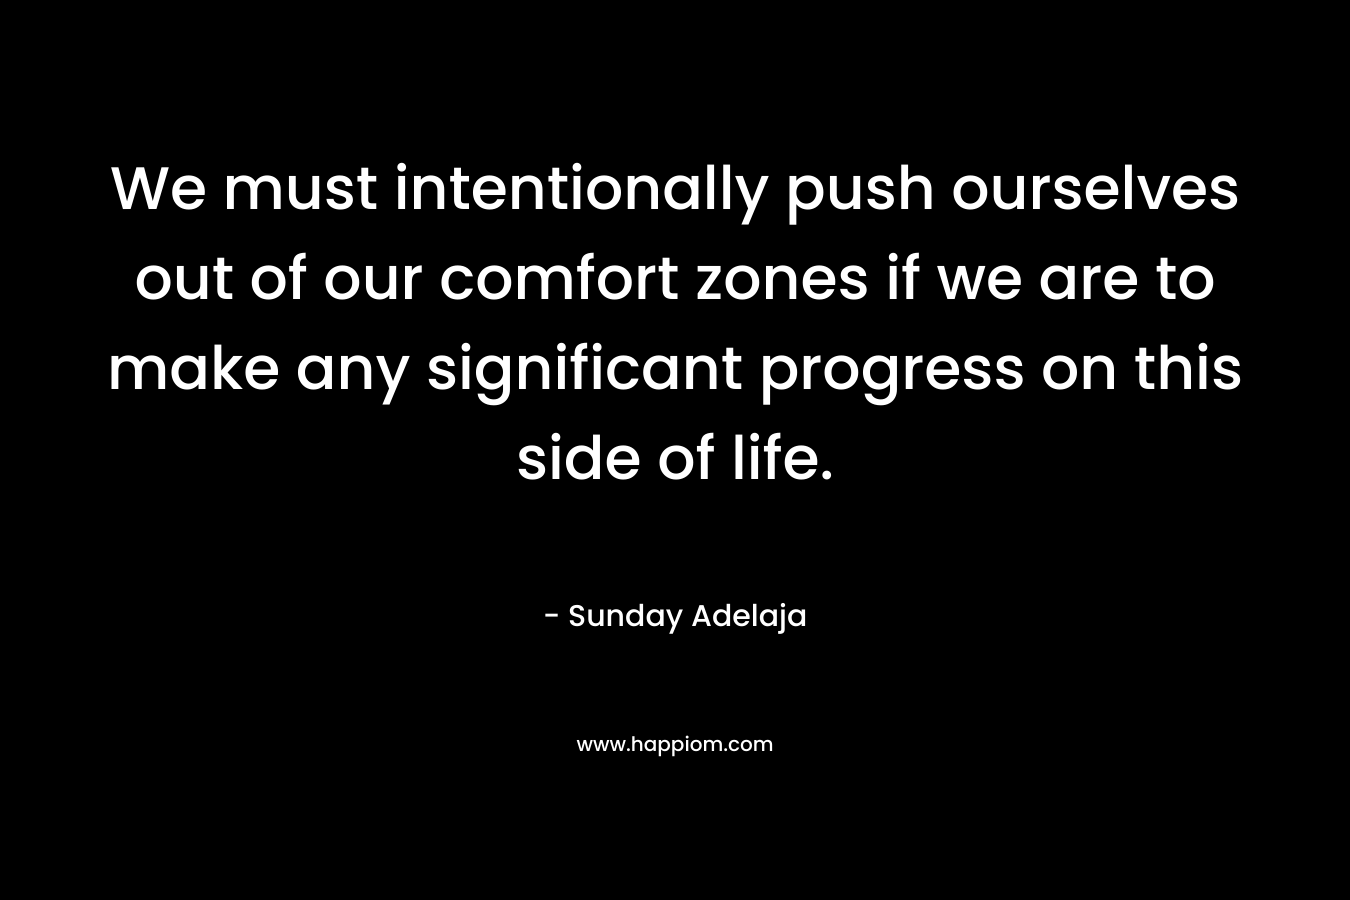 We must intentionally push ourselves out of our comfort zones if we are to make any significant progress on this side of life. – Sunday Adelaja